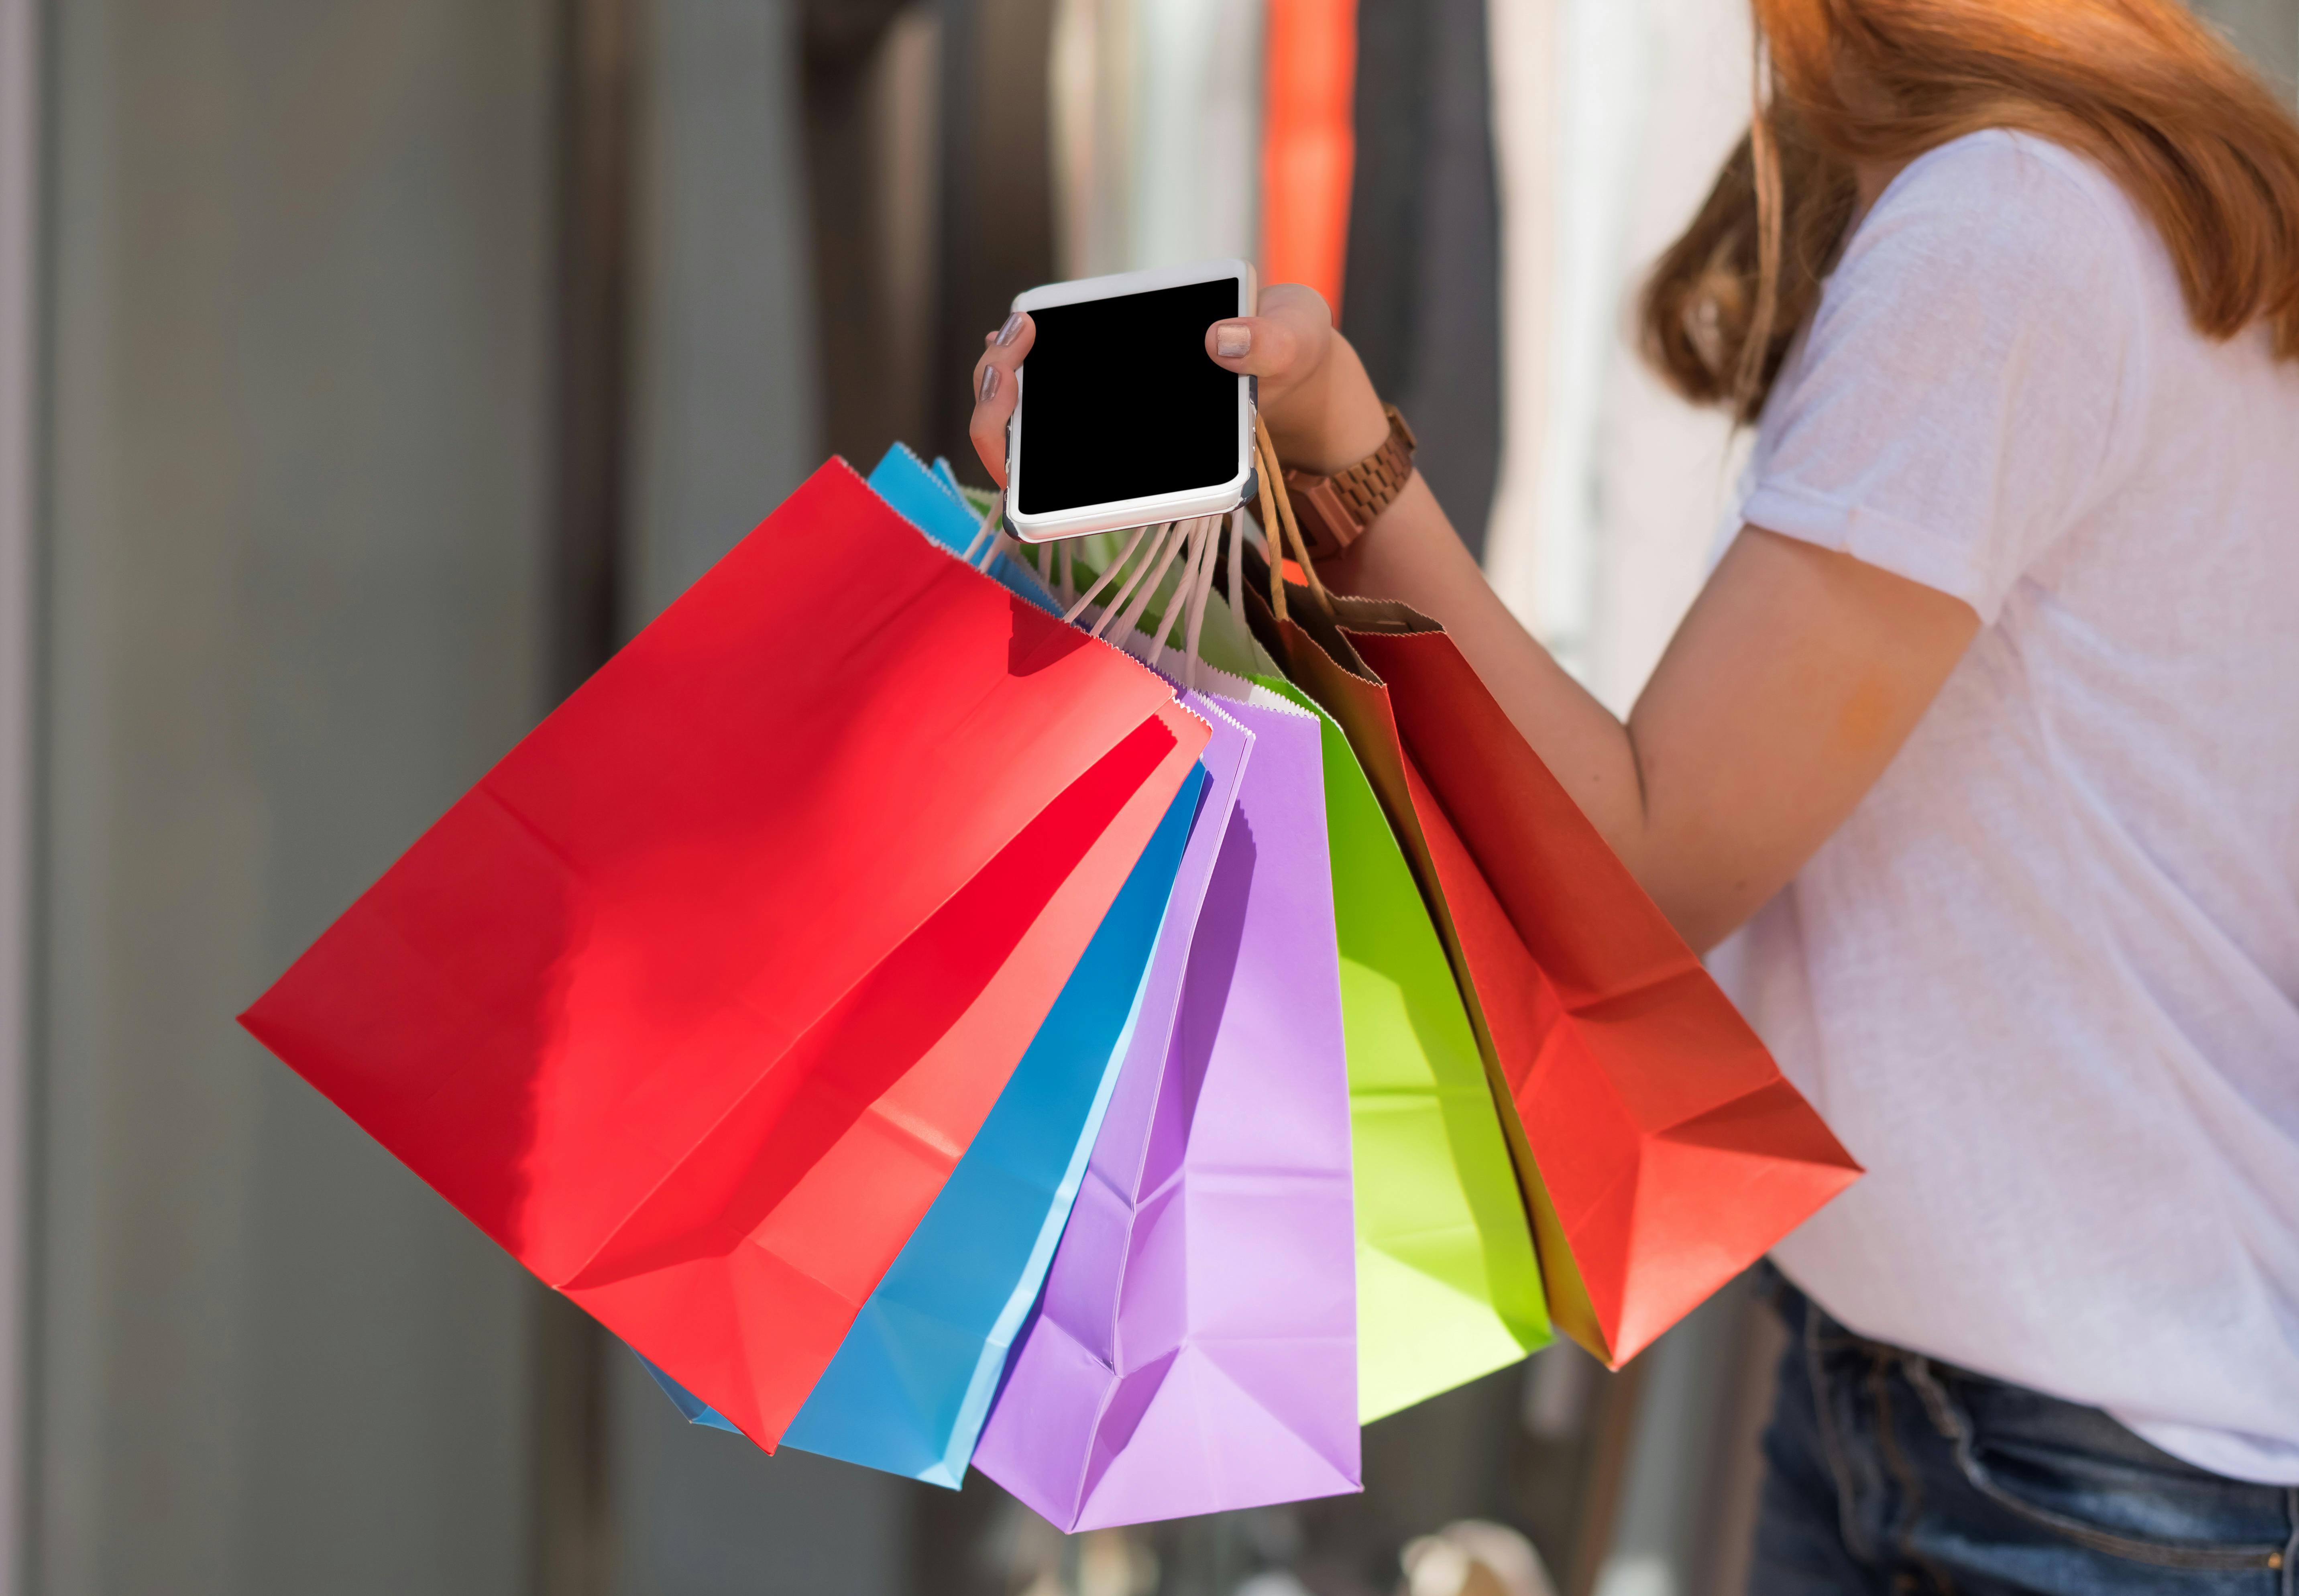 Women holds a smartphone and a shopping bag together